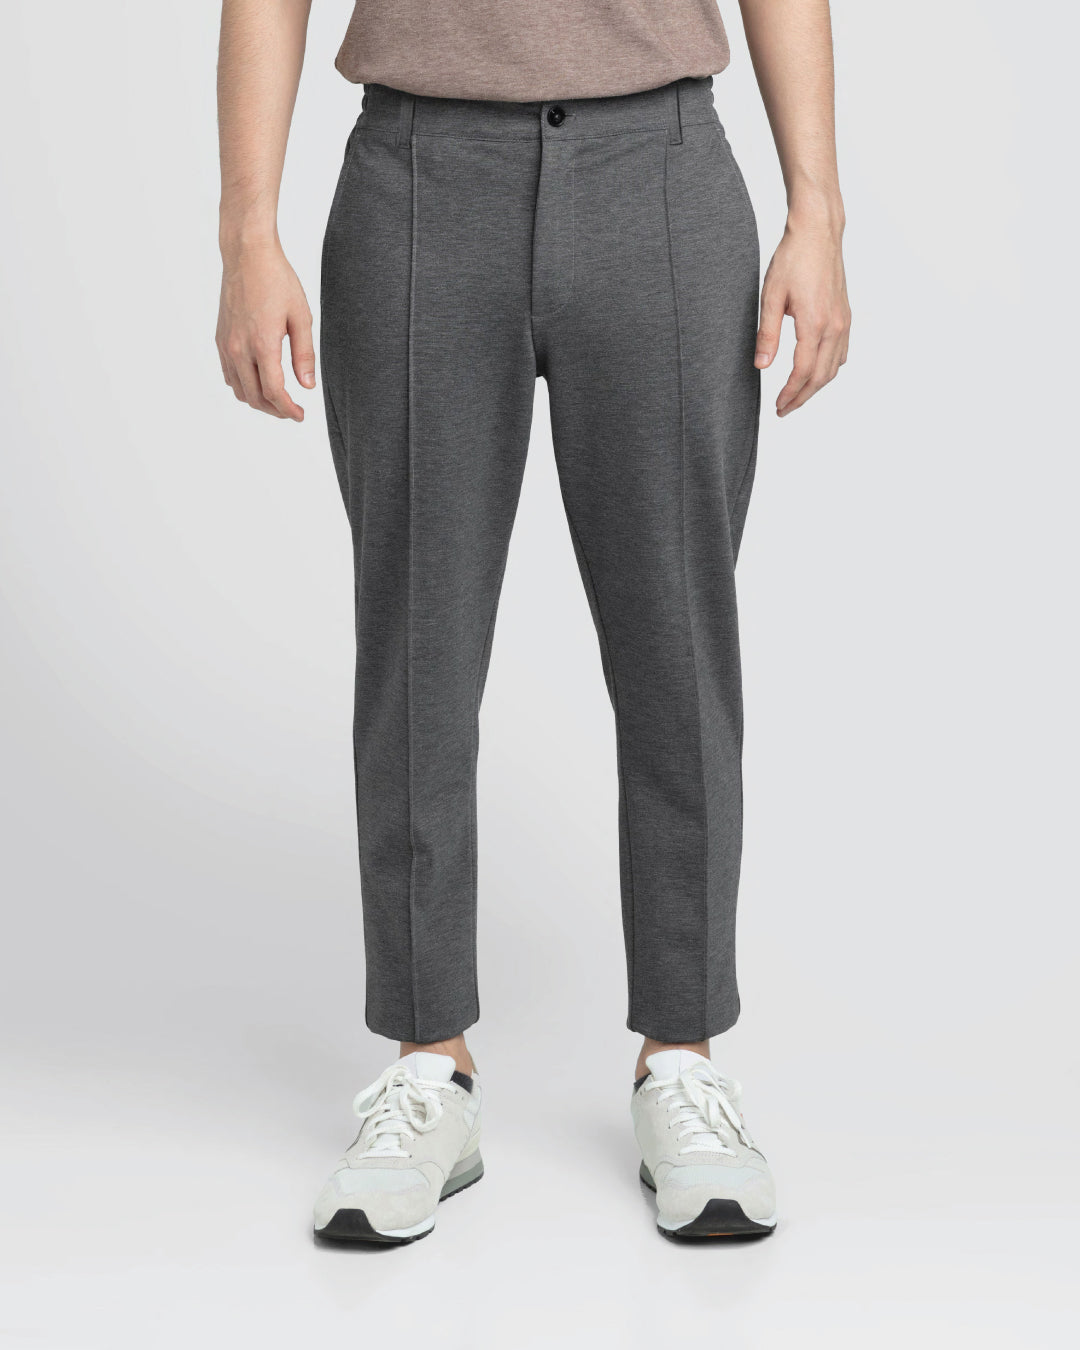 Men's Cropped Trousers & Jeans